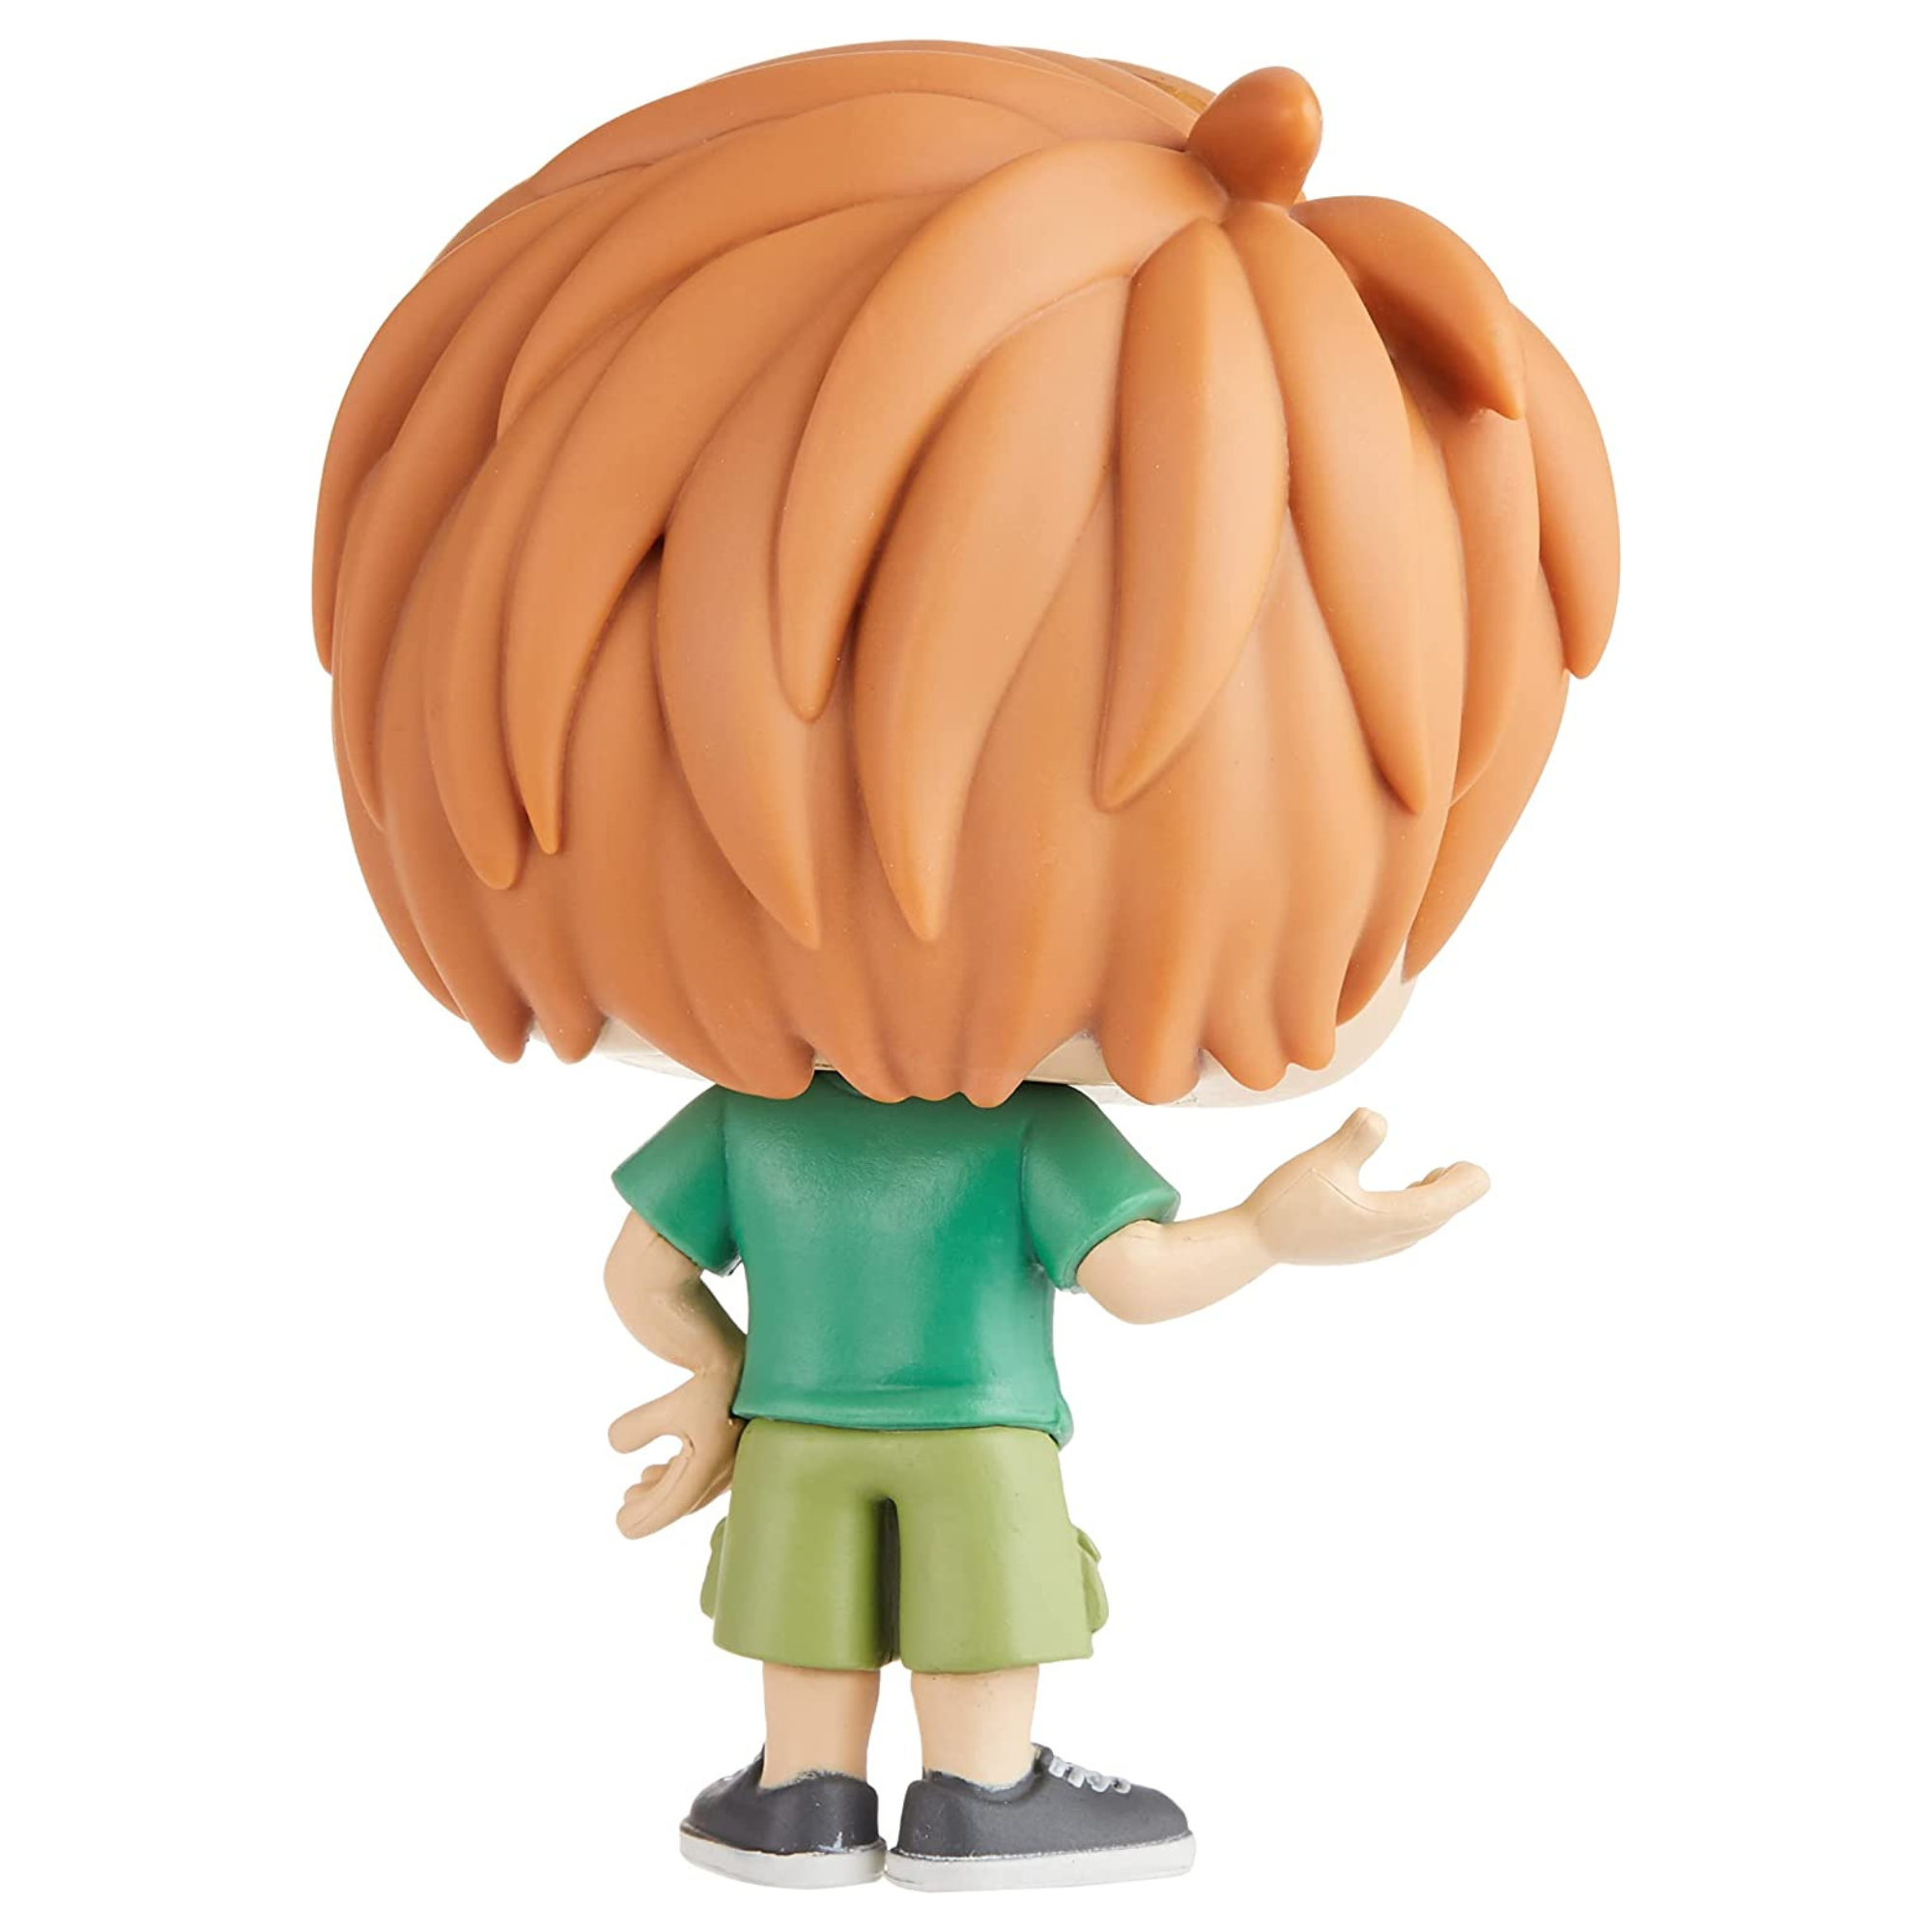 Funko Pop! Movies Scoob! Young Shaggy (Special Edition) #911 - Toptoys2u